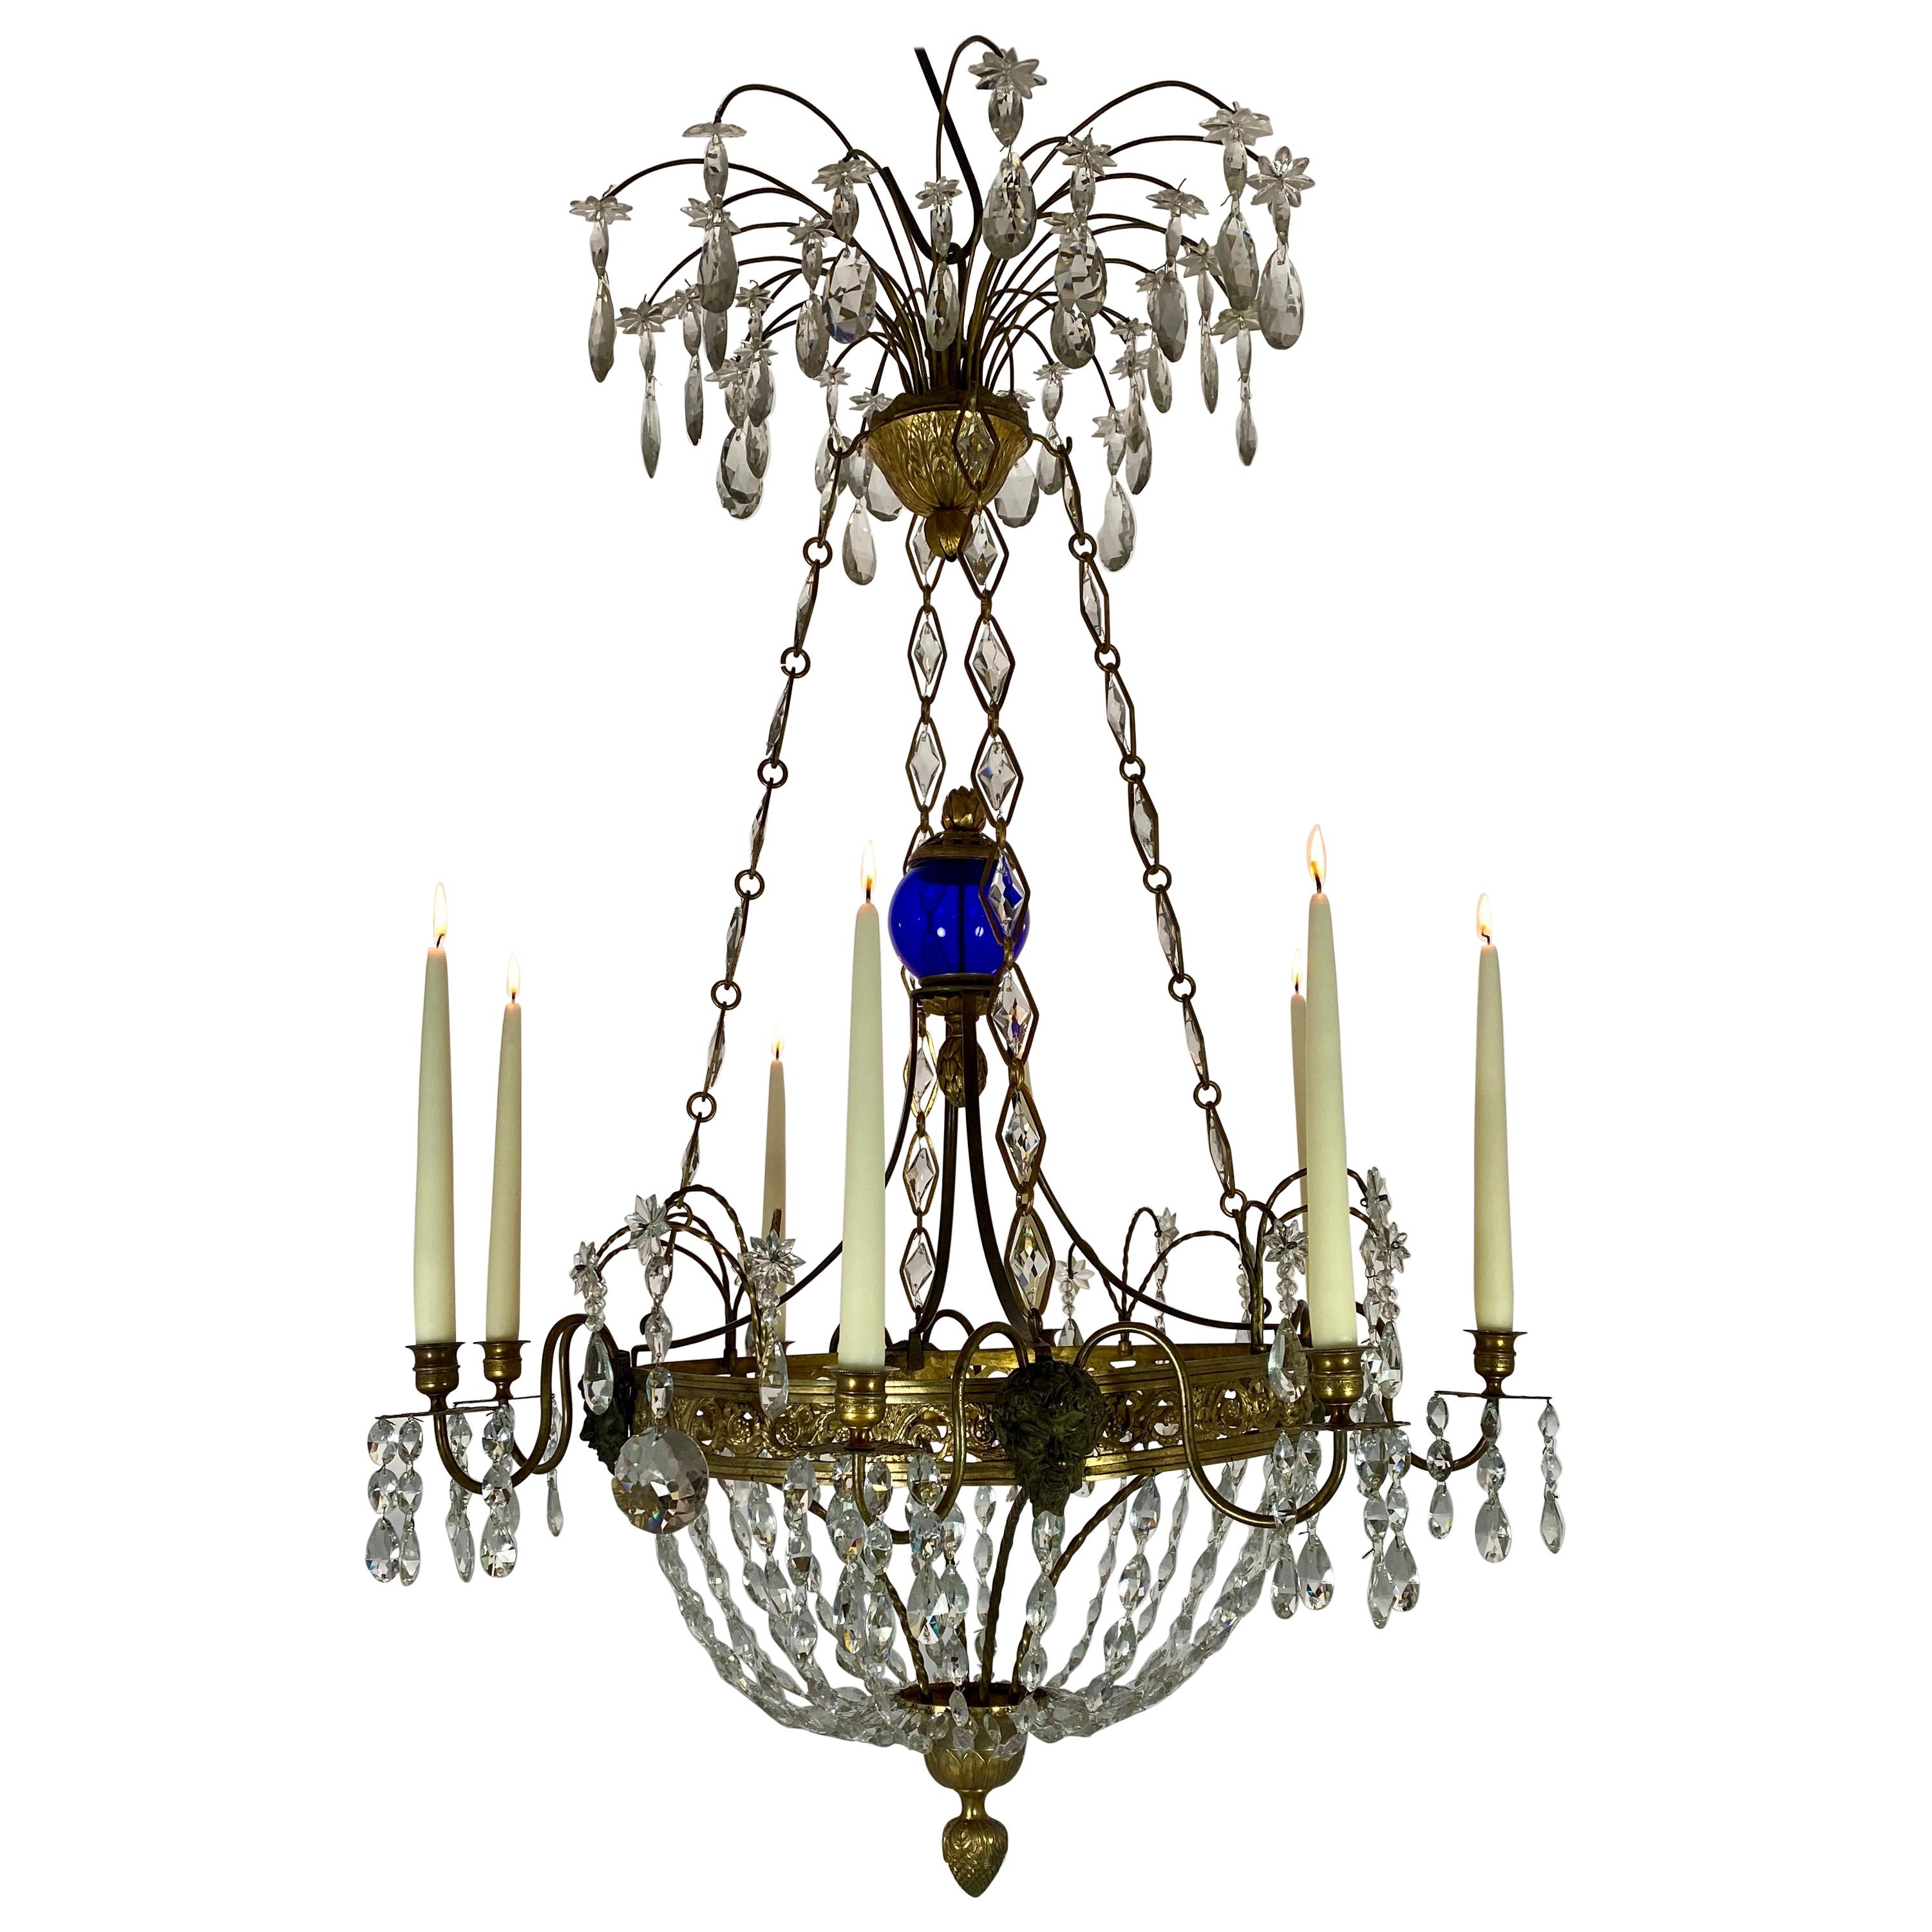 Russian Empire Chandelier, Early 19th C